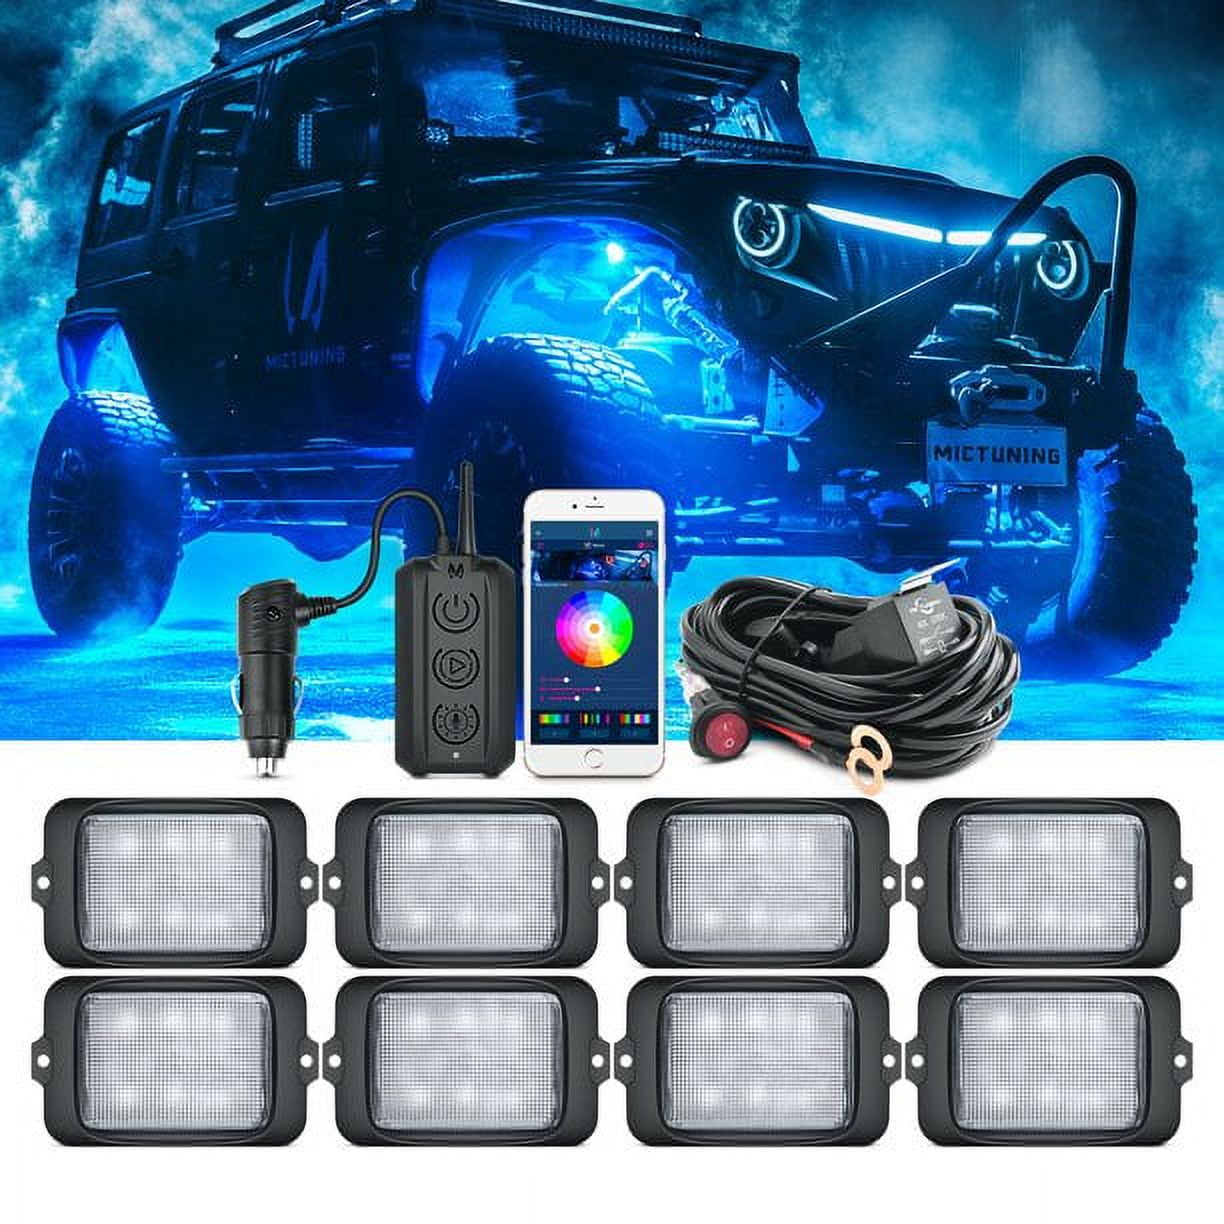 MICTUNING Upgraded C3 RGBW LED Rock Lights Wireless Control, 8 Pods Multi-Color Neon Underglow Lights with Bluetooth App & Control Box, Extensible Up